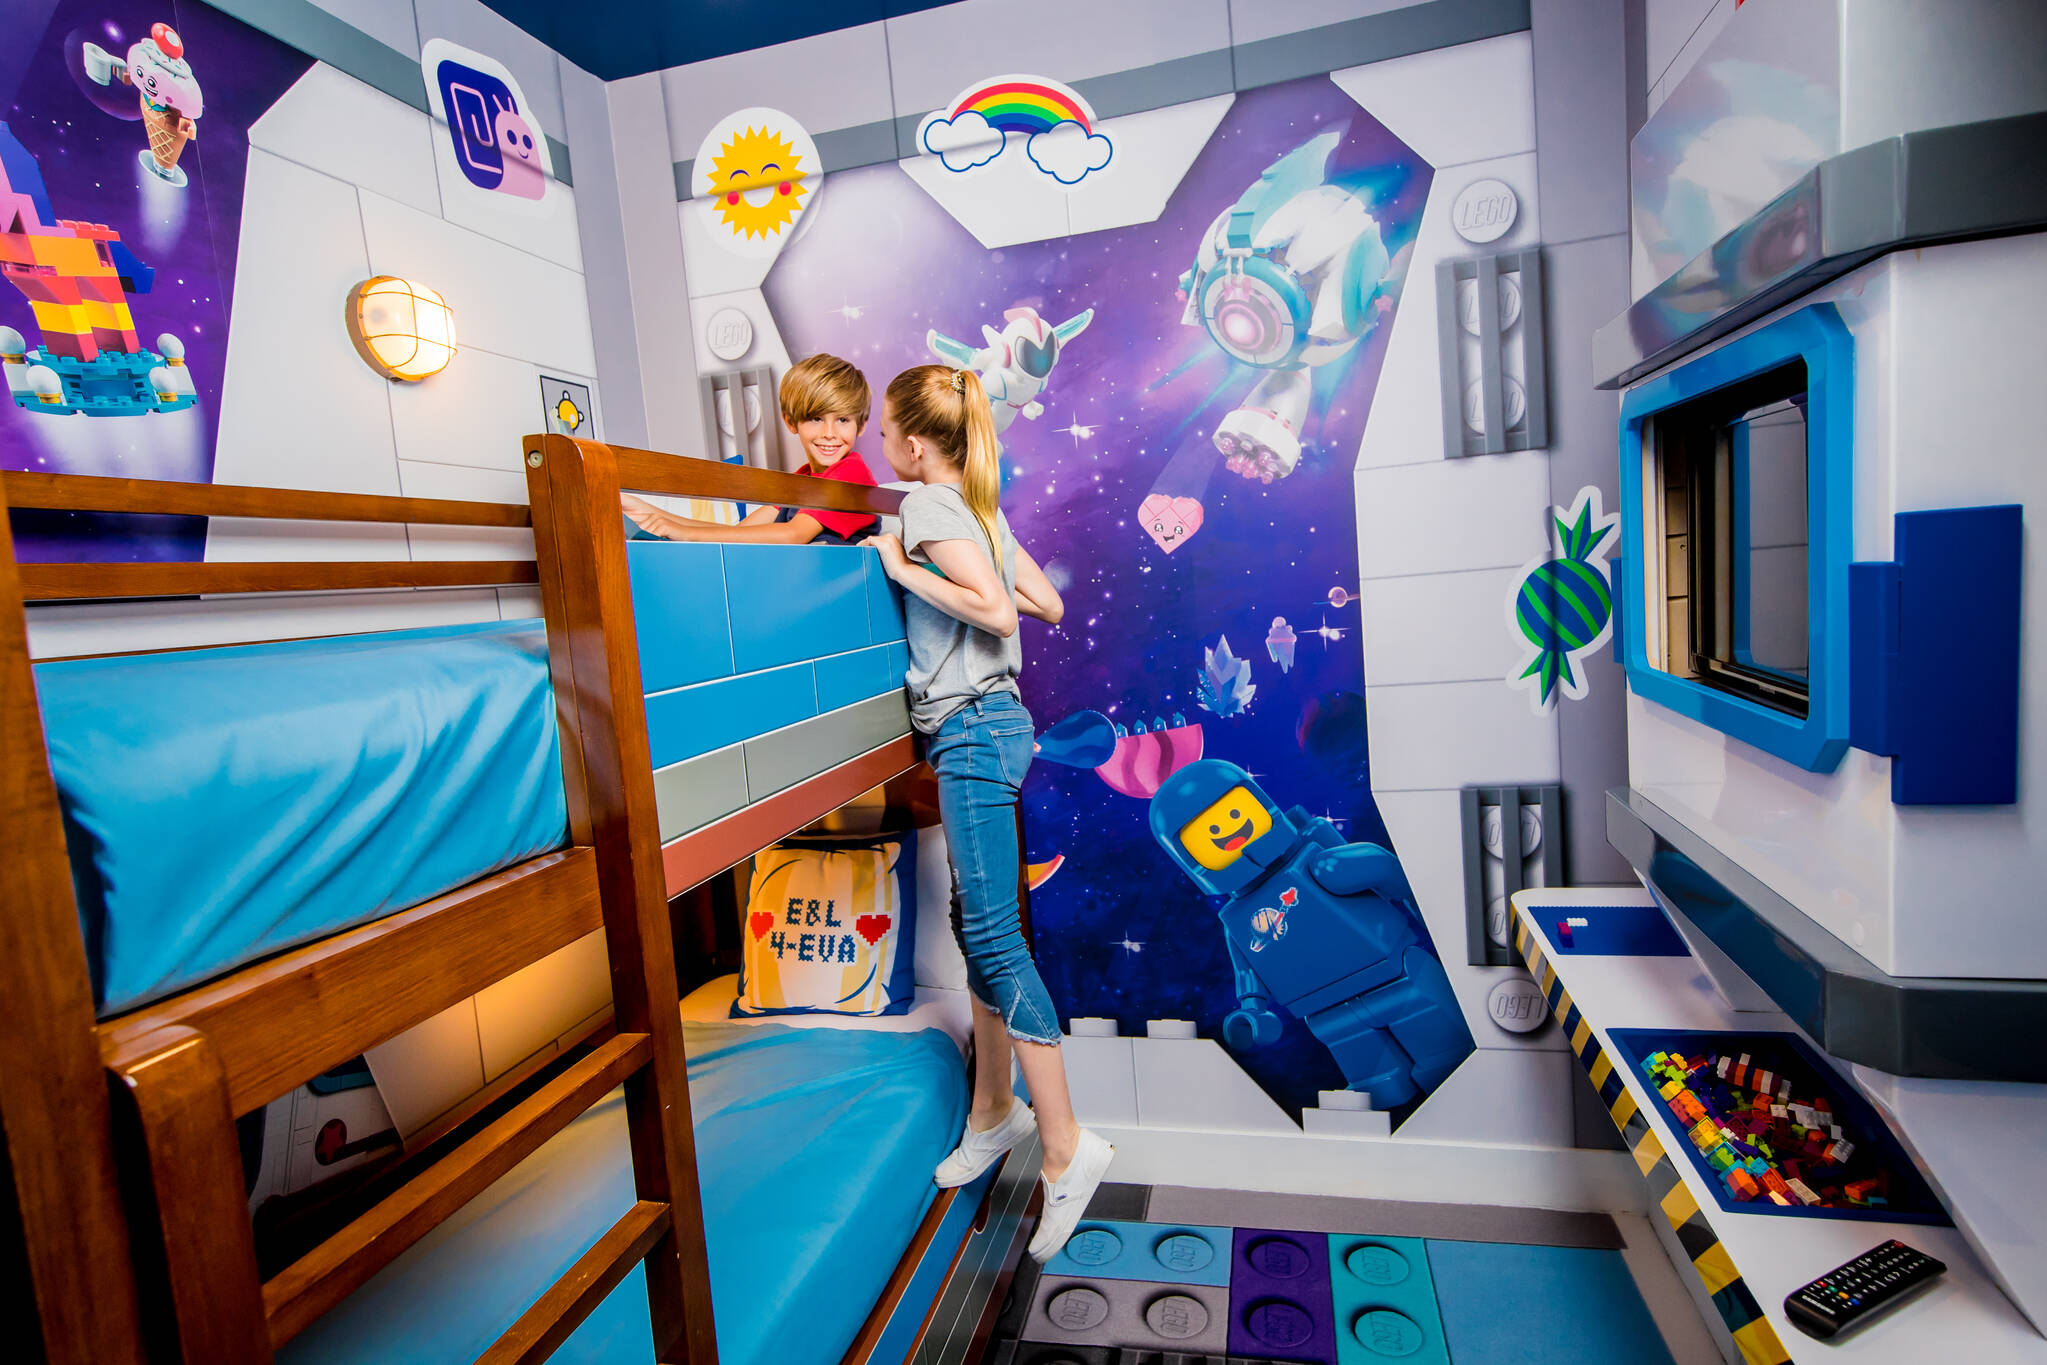 The LEGO Movie Room Kids Bunkbed at the LEGOLAND Hotel